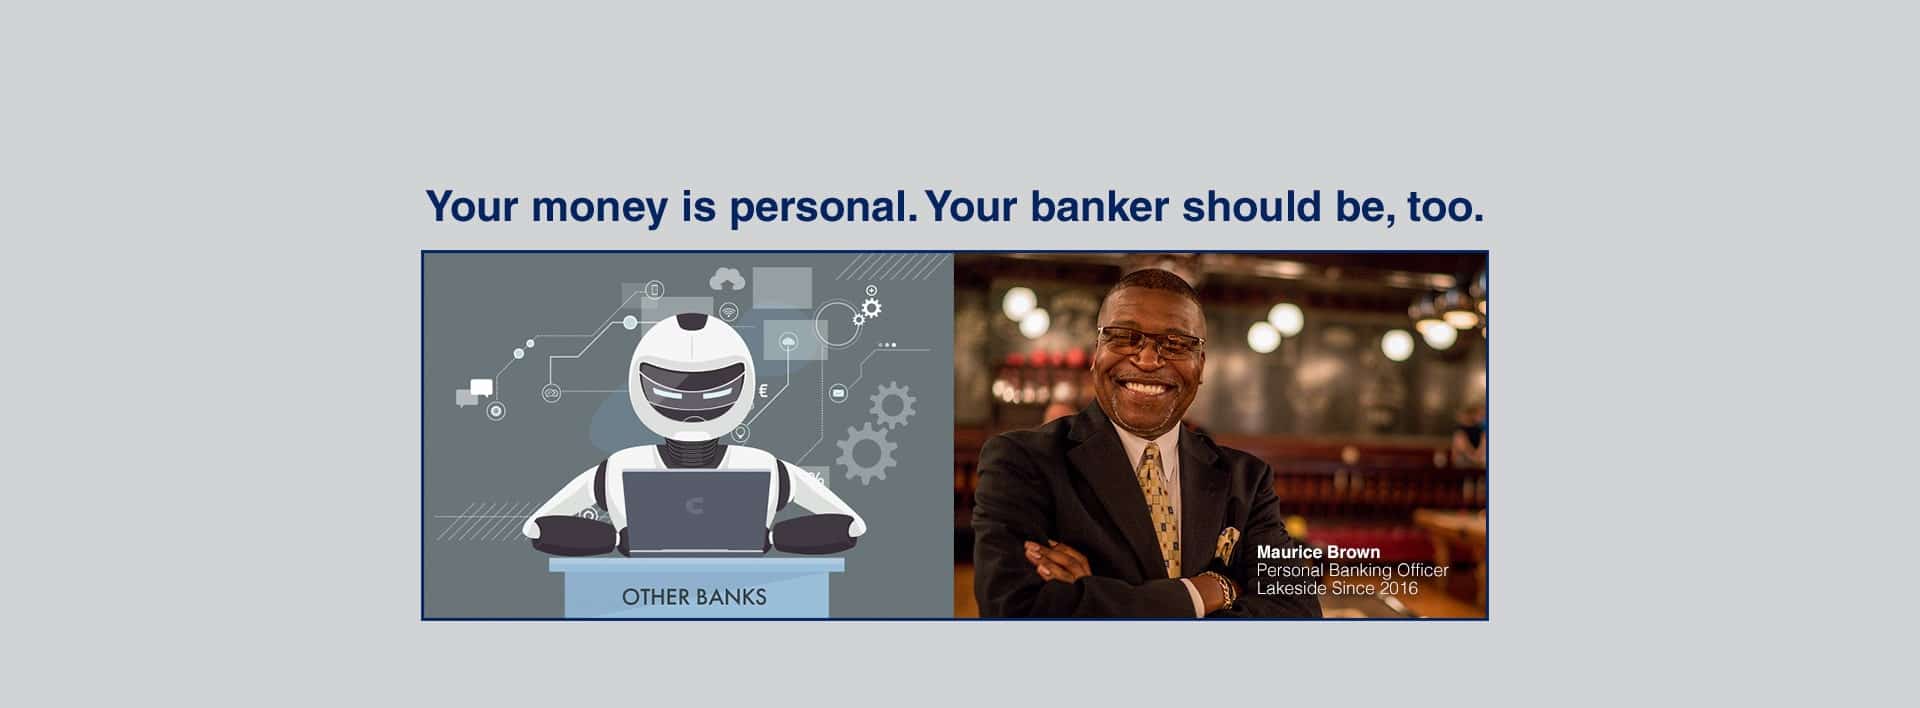 Your money is personal.Your banker should be too.